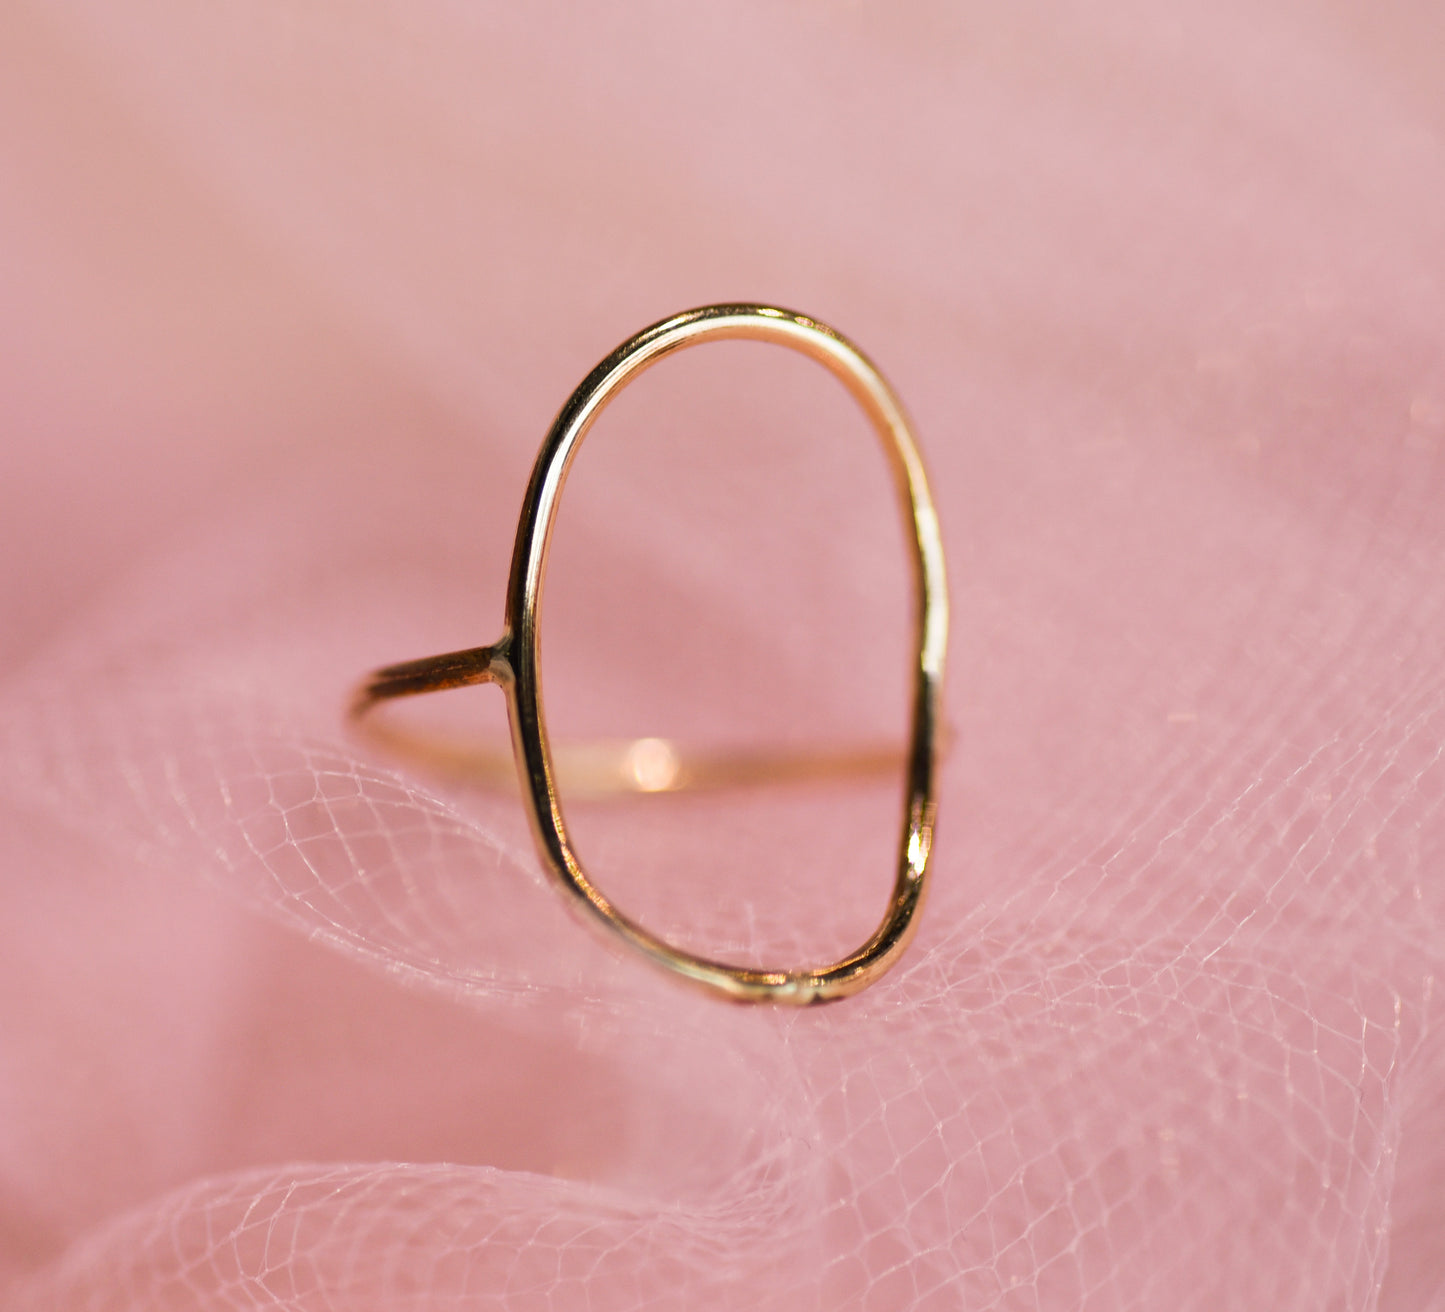 Large Open Oval Ring